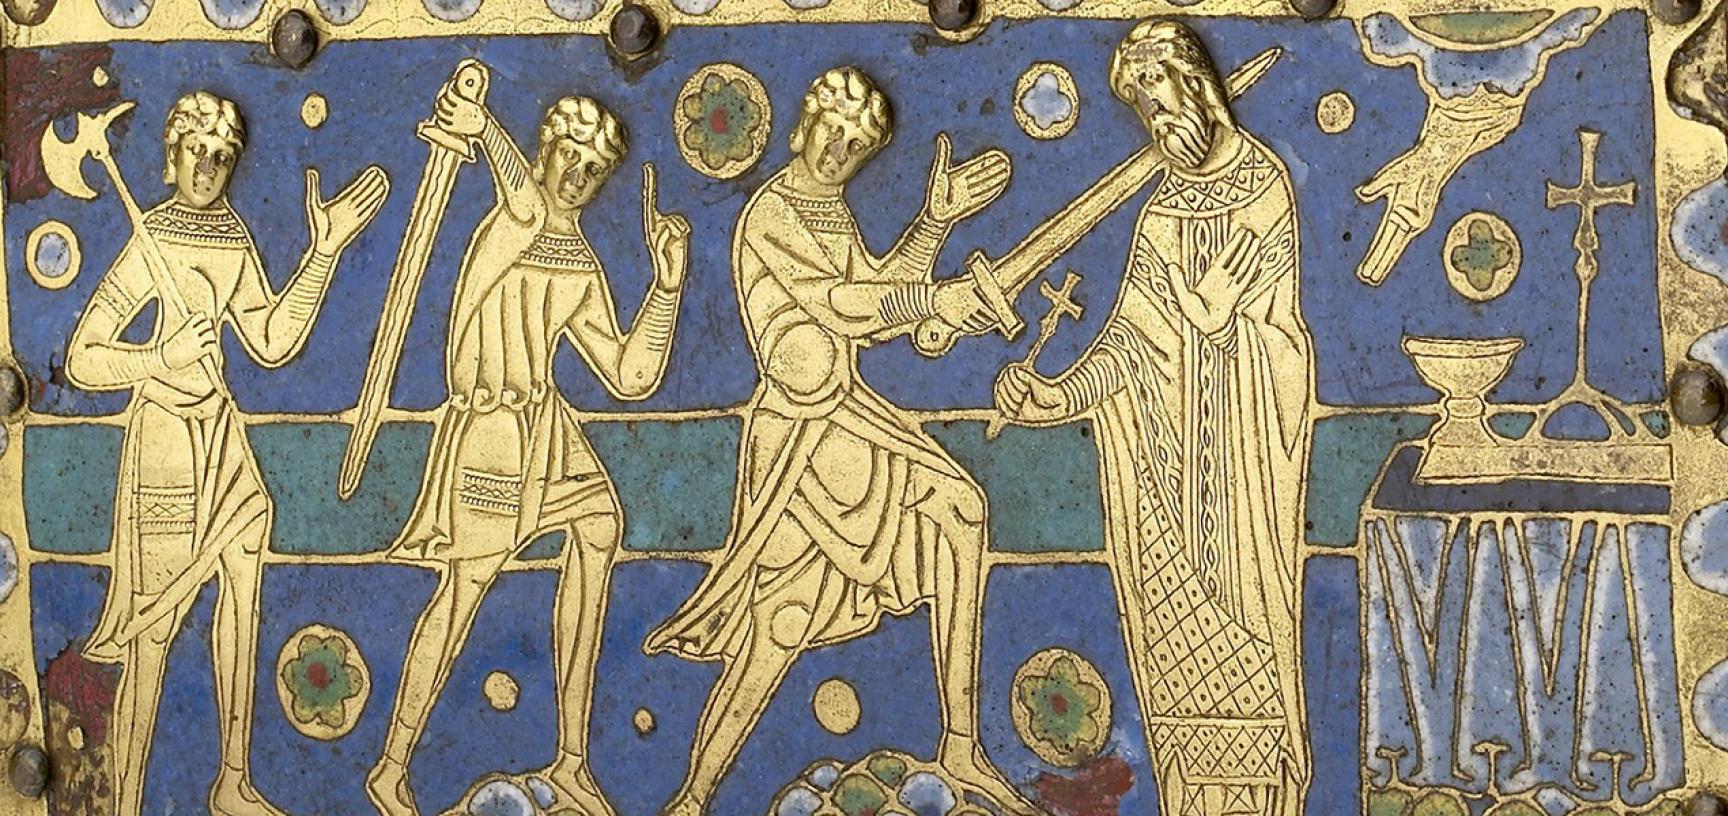 RELIQUARY CASKET OF ST THOMAS BECKET (detail) from the Ashmolean collections